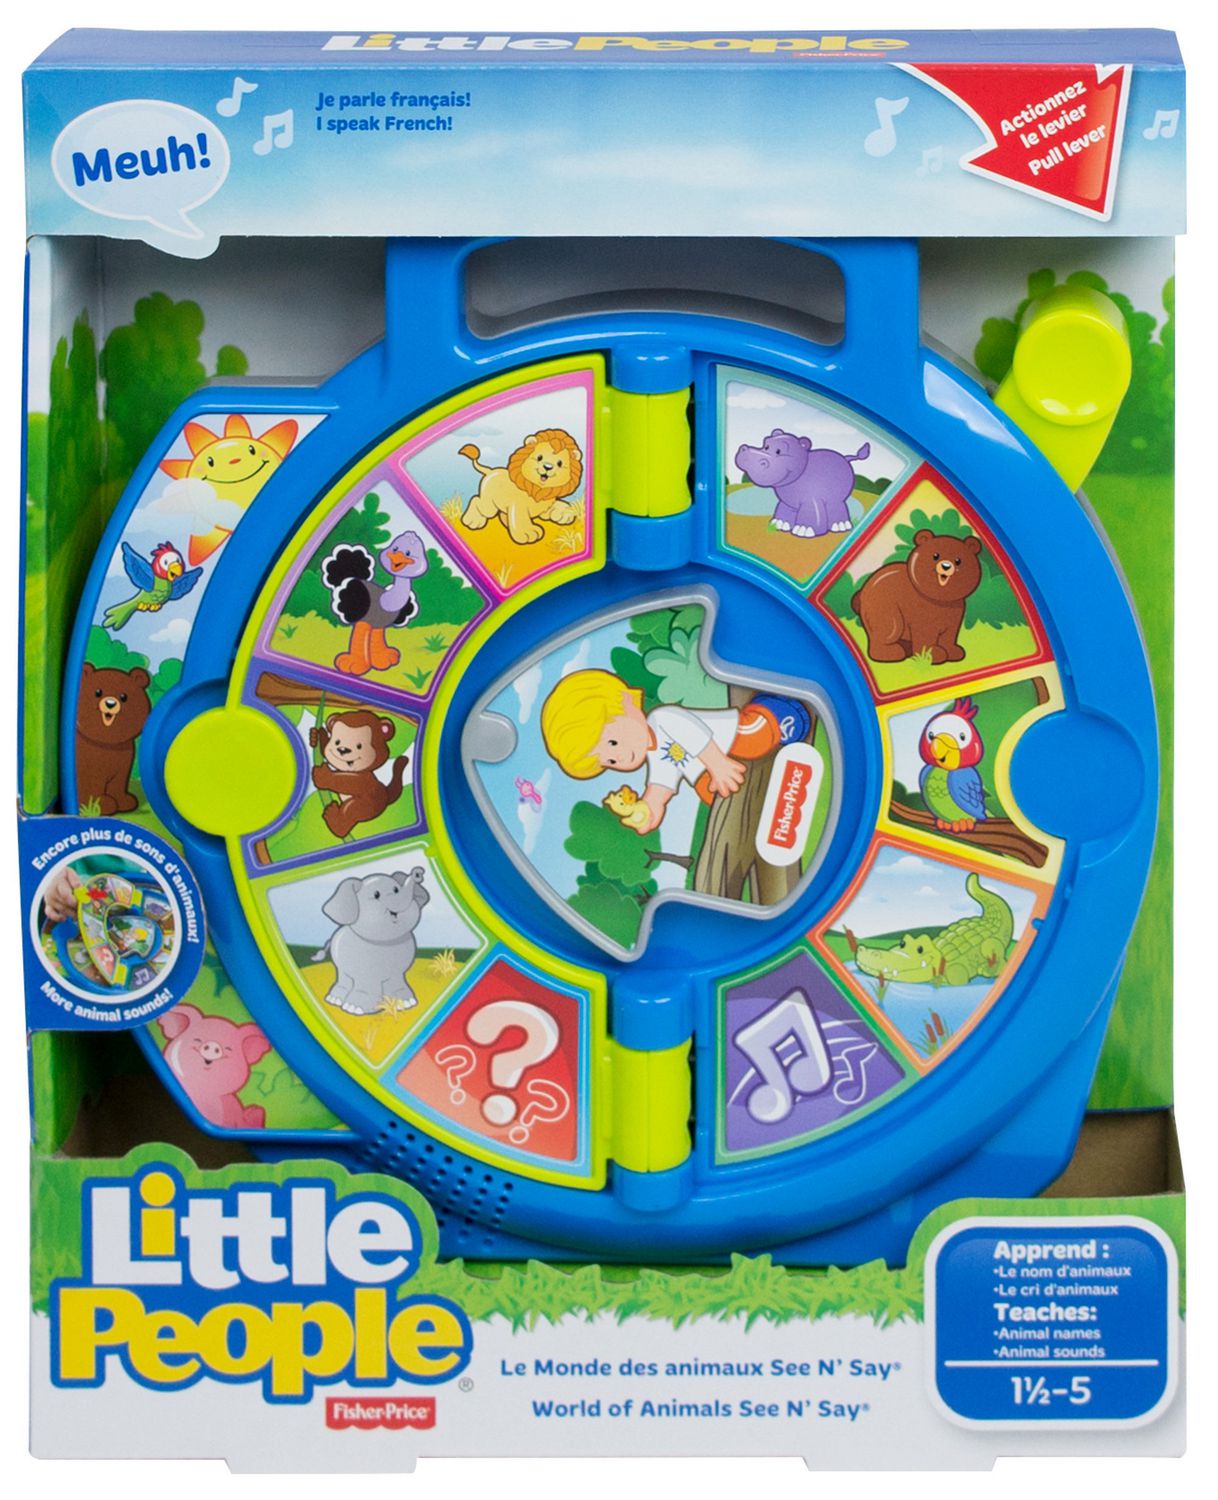 fisher price world of little people